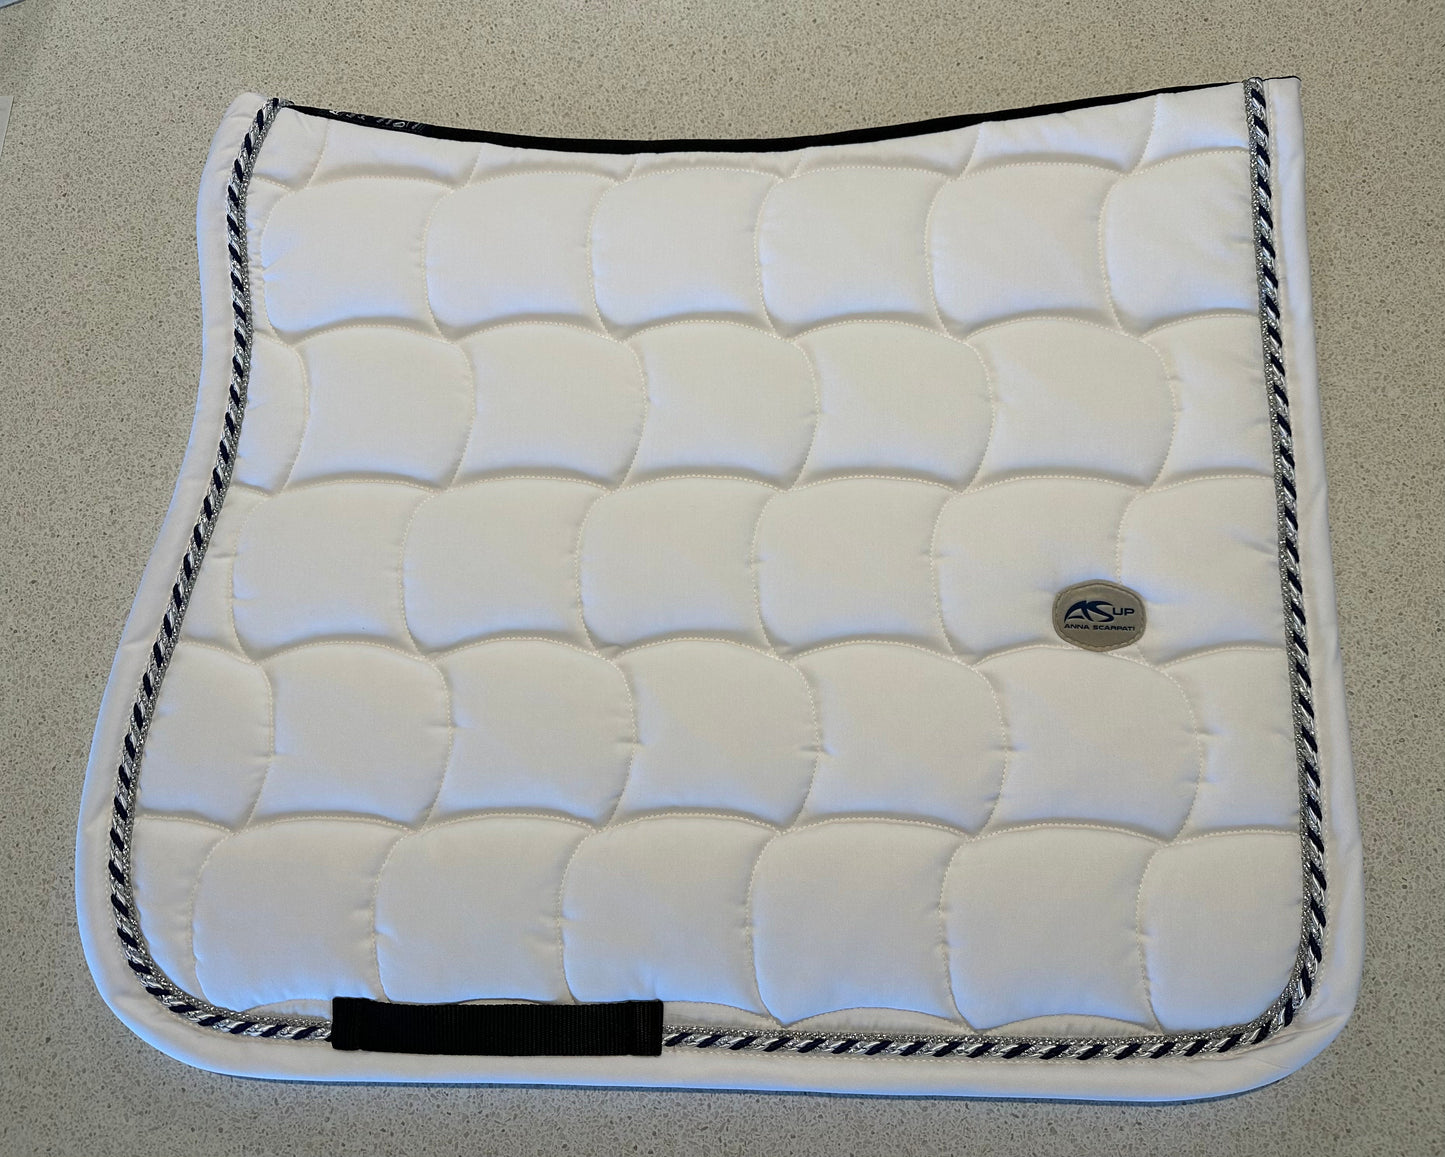 Anna Scarpati white quilted horse saddle pad with black trim.